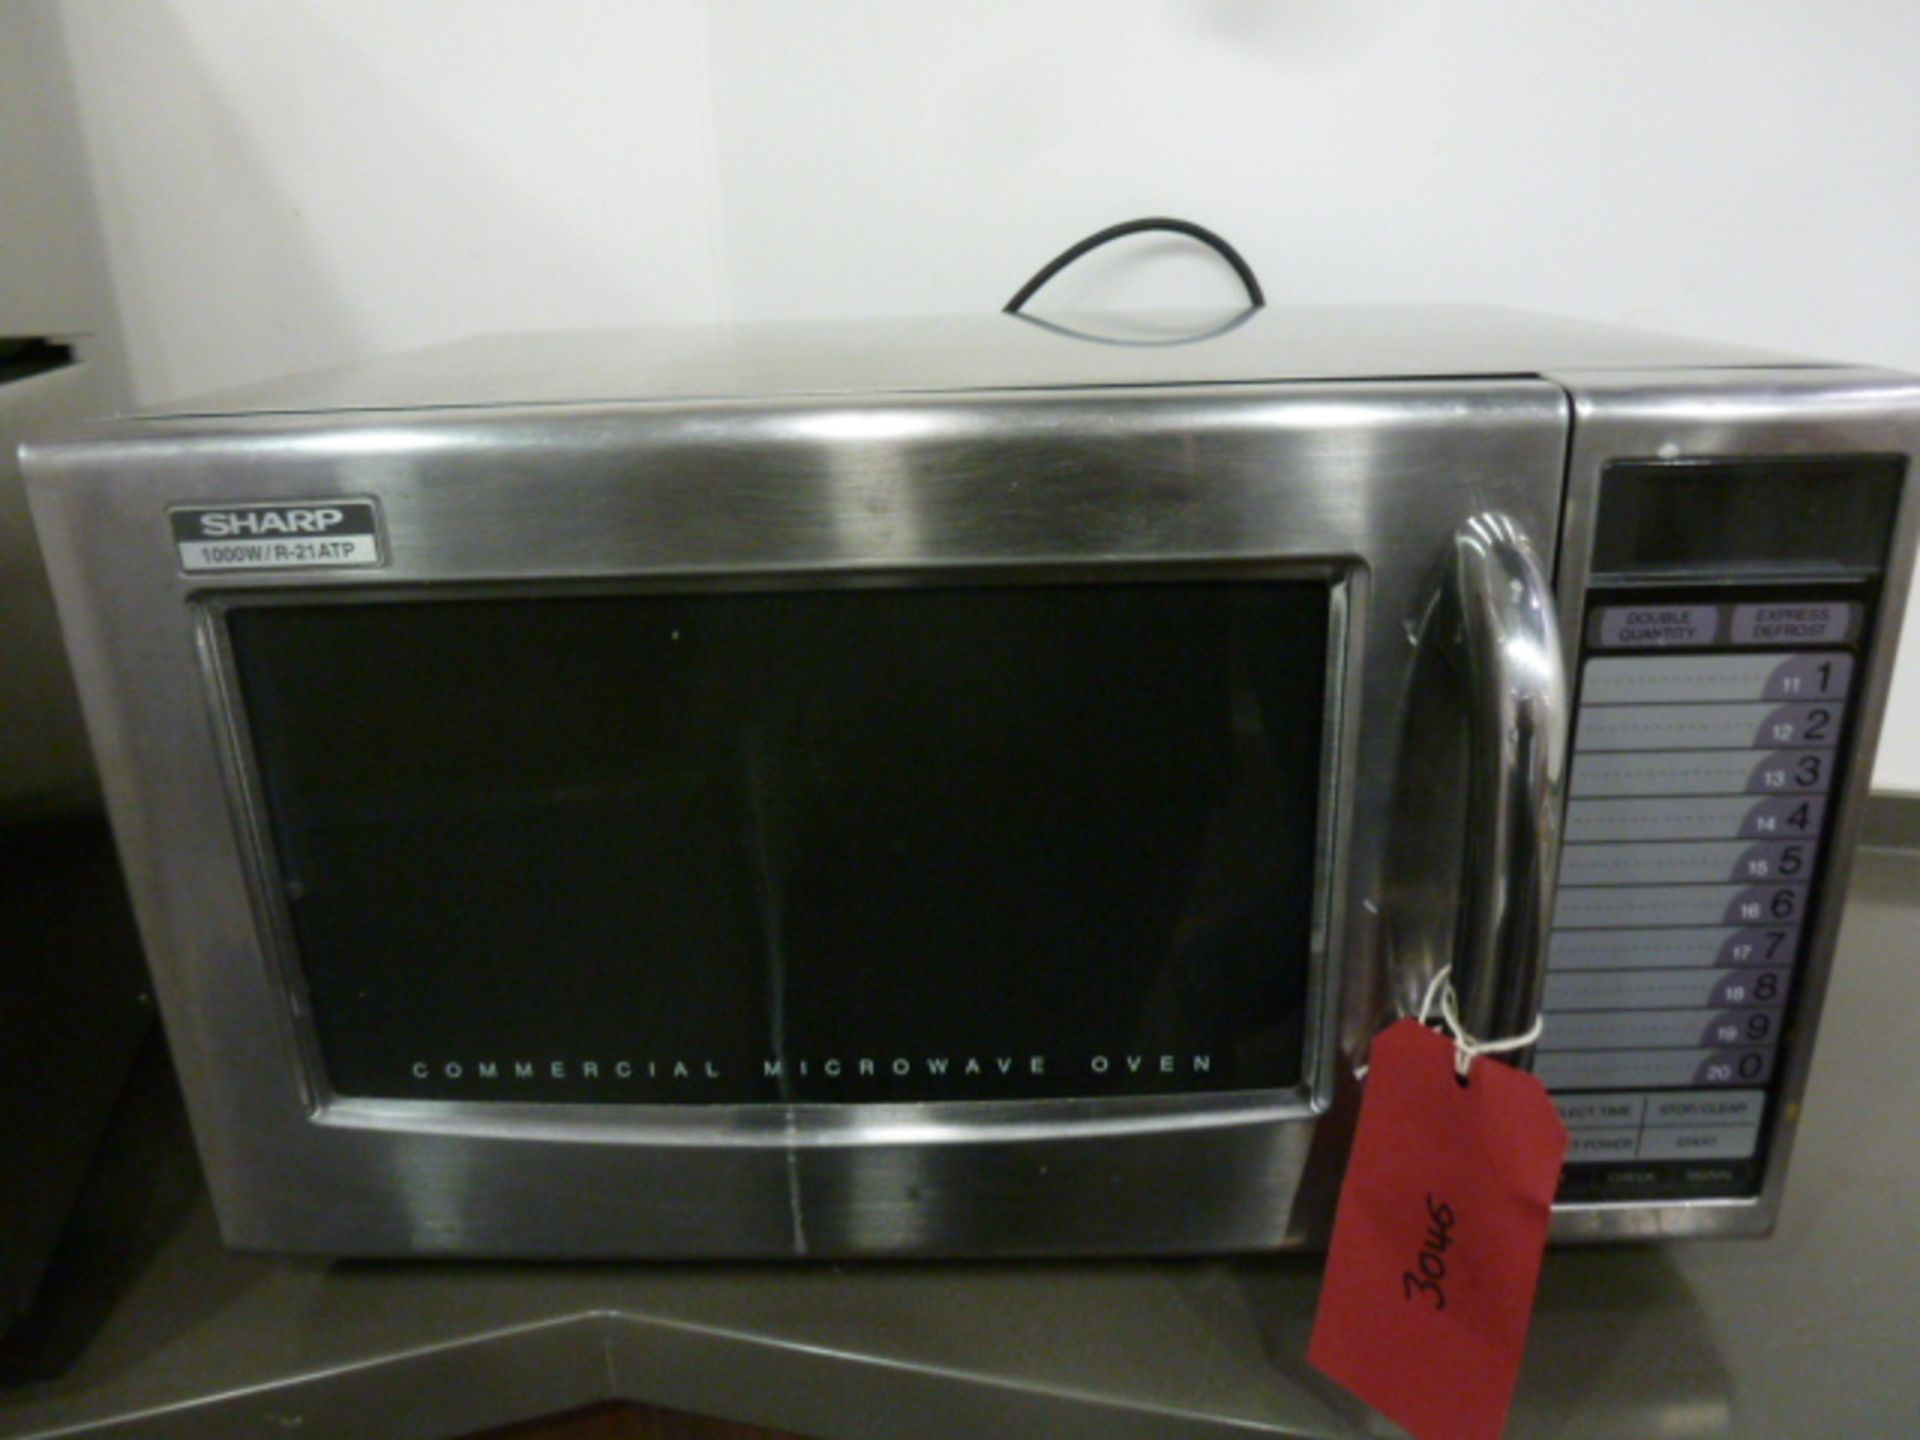 Sharp 1000W Commercial Microwave Oven, Model R-21ATP